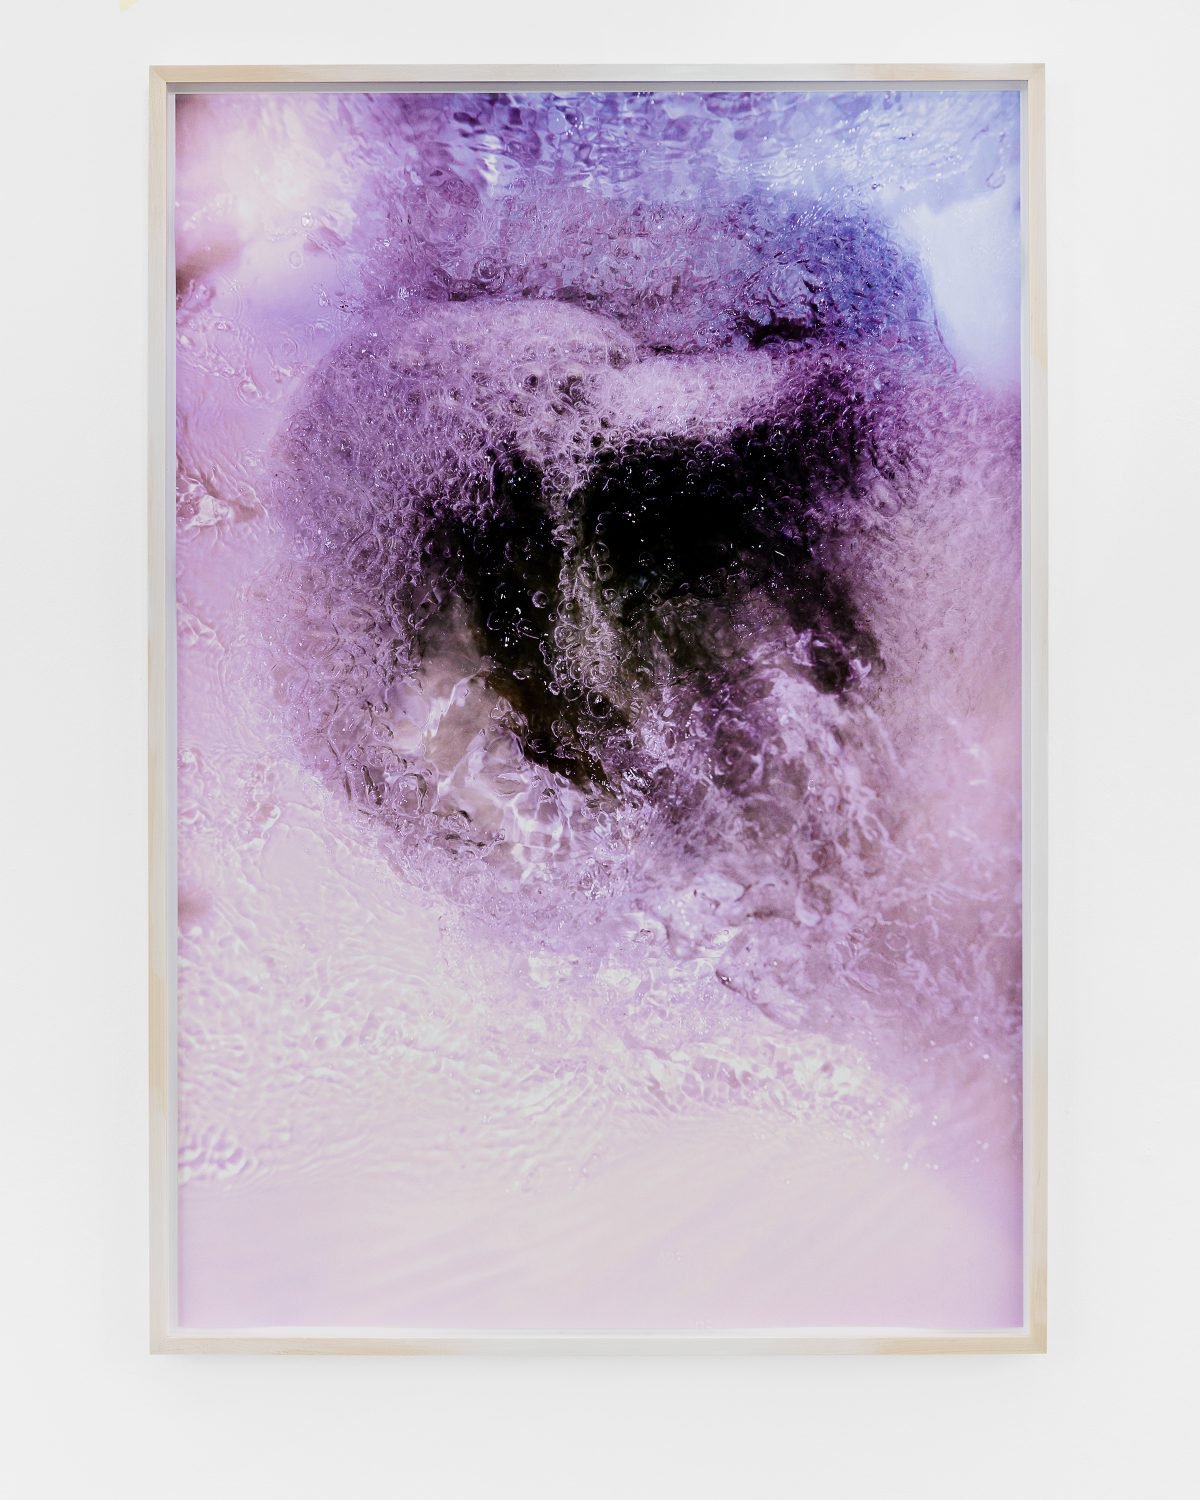 Lisa HolzerFlush (with and without flash), 2019Pigment print on cotton paper, Crystal Clear 202/1 polyurethane on glass, semigloss enamel on wood110.3 x 76 cm